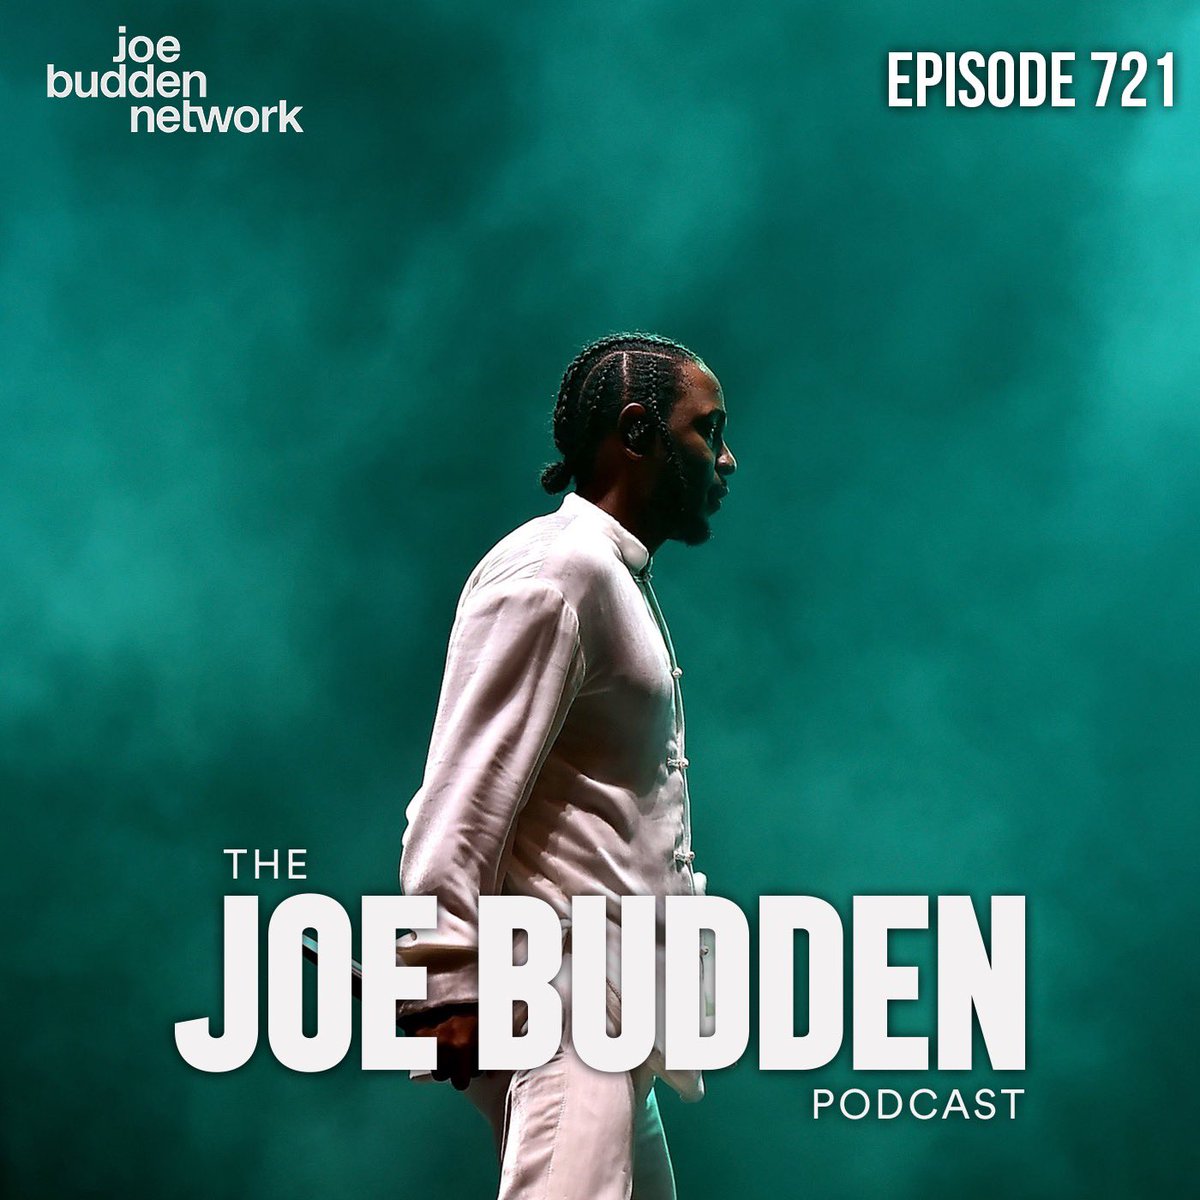 The @JoeBudden Podcast Episode 721 | “Unbuttoned” is now available❗️ Tune In 🎧 Apple: tinyurl.com/7czb5pa8 🎧 SoundCloud: tinyurl.com/3337uj79 🎧 Spotify: tinyurl.com/6w56pdkf 🎥 Patreon: patreon.com/joebudden